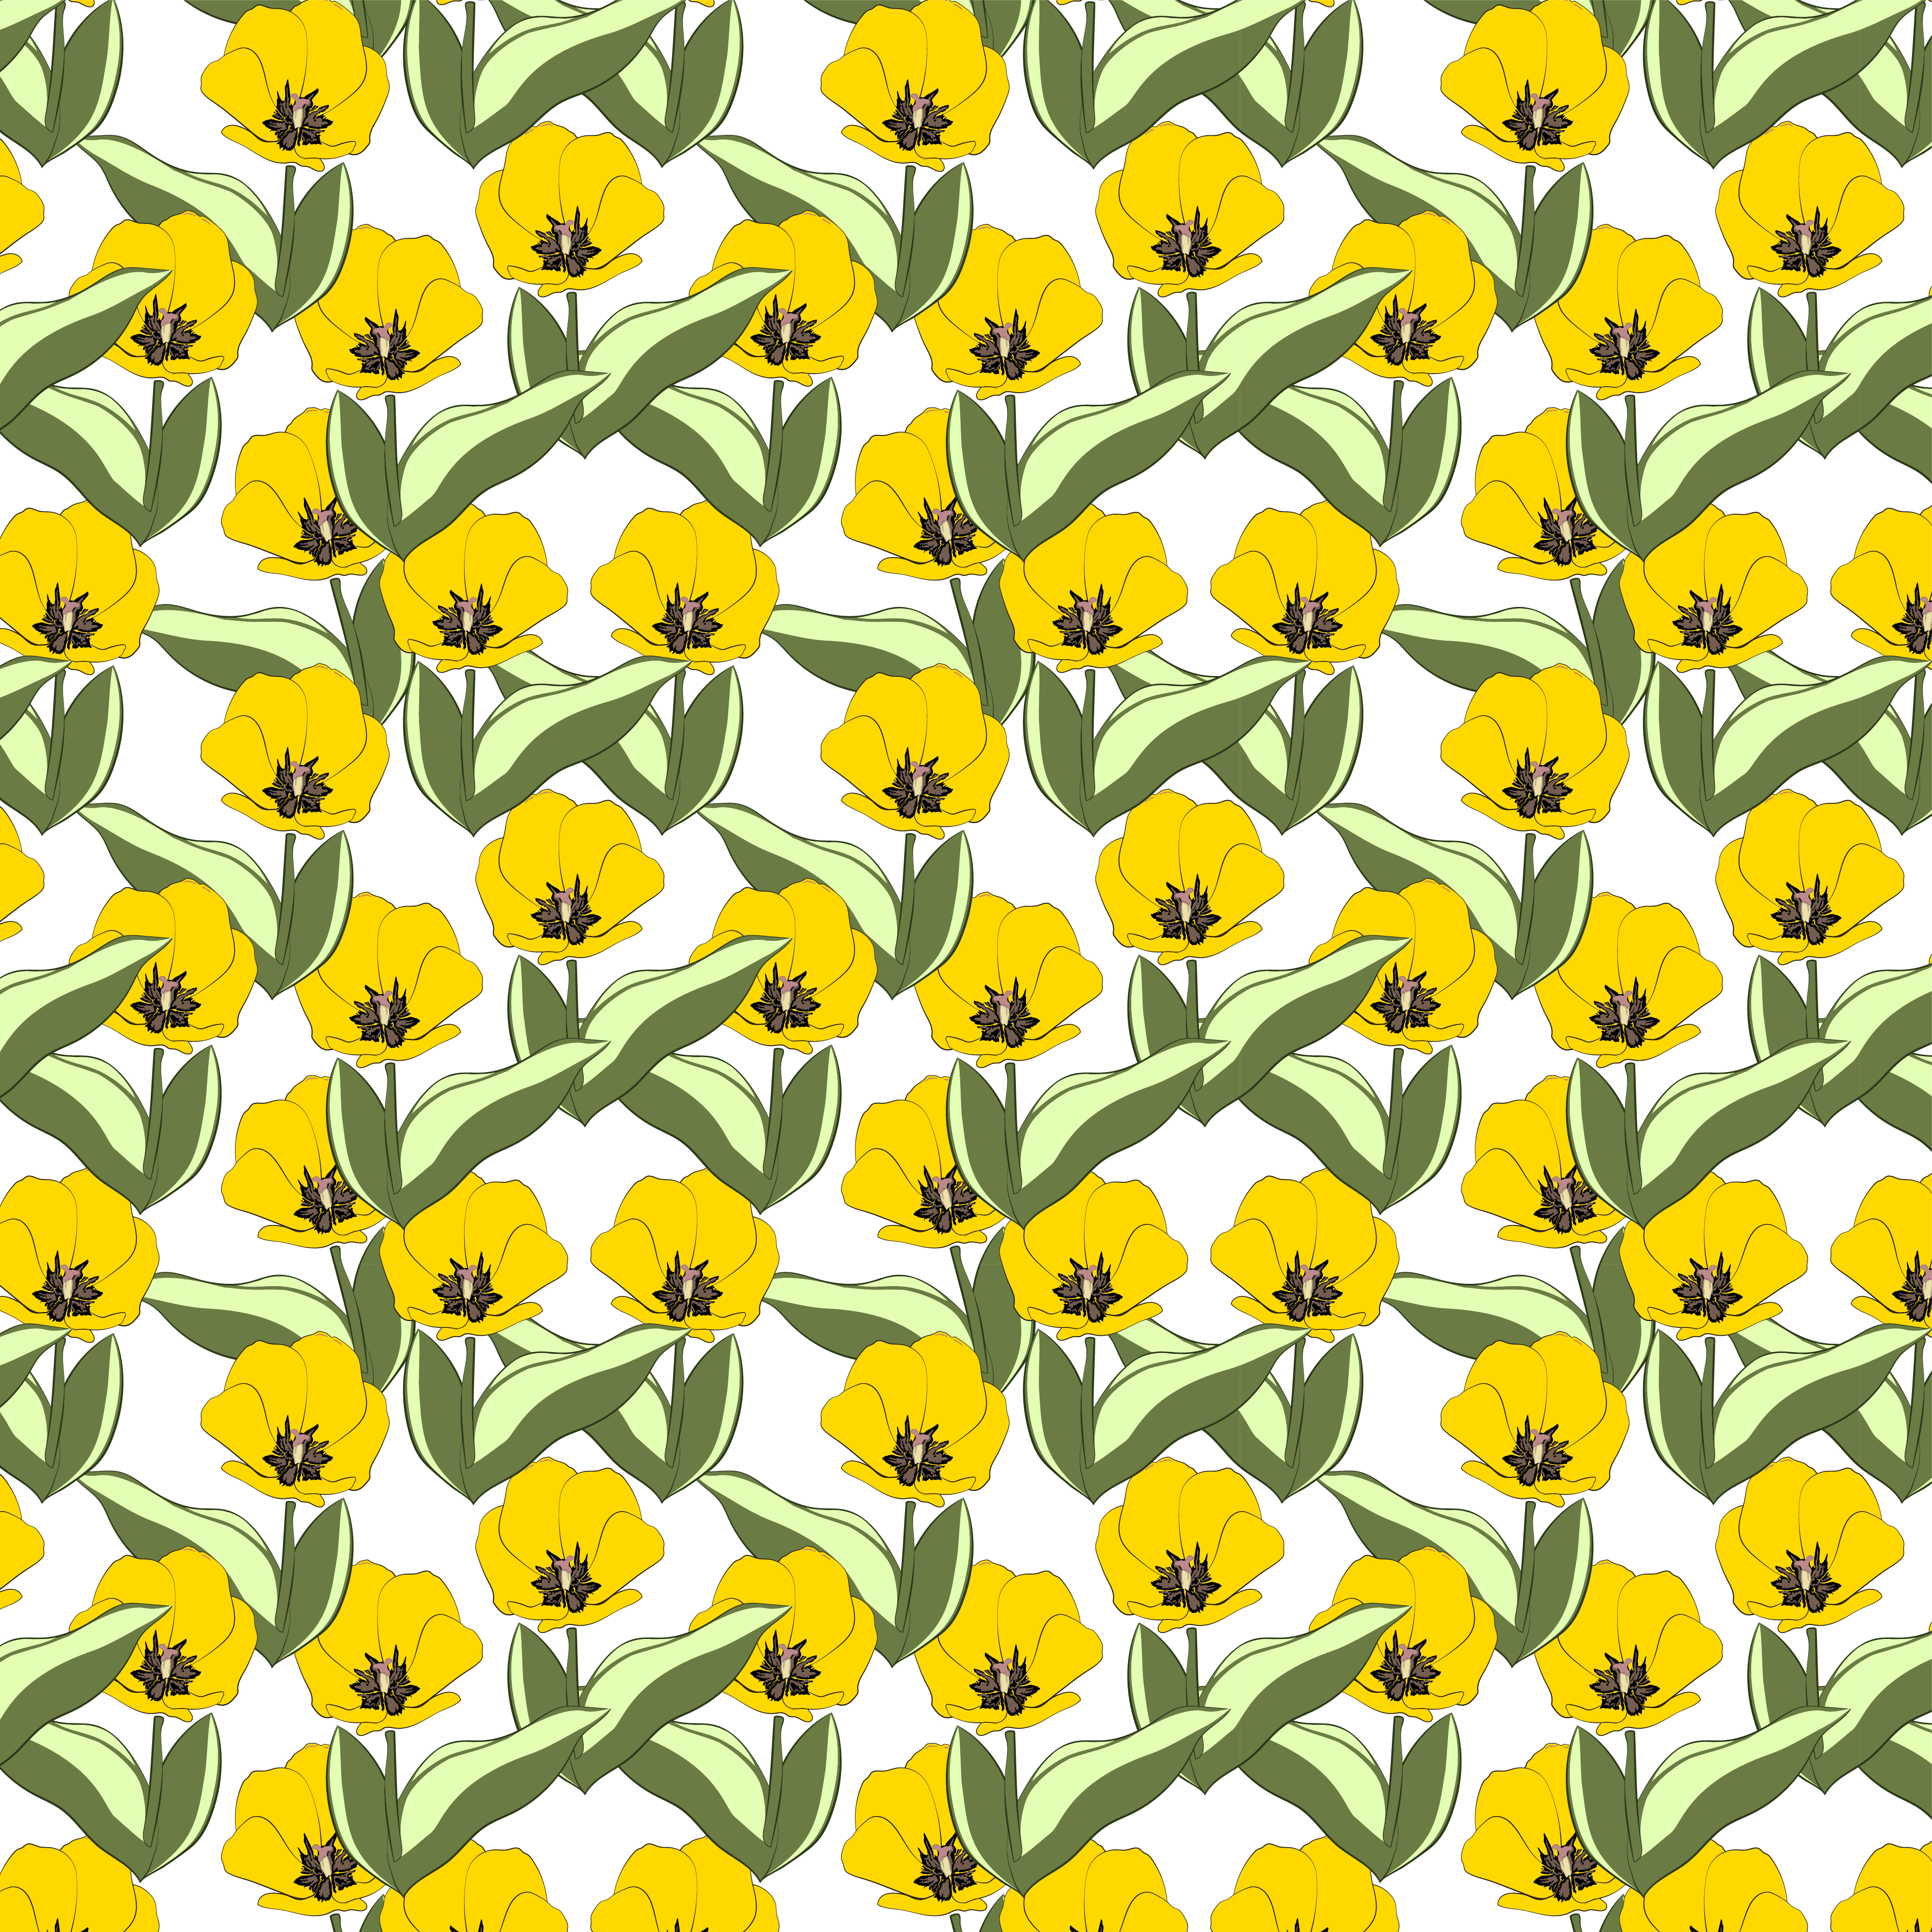 Pattern of yellow tulips and green leaves